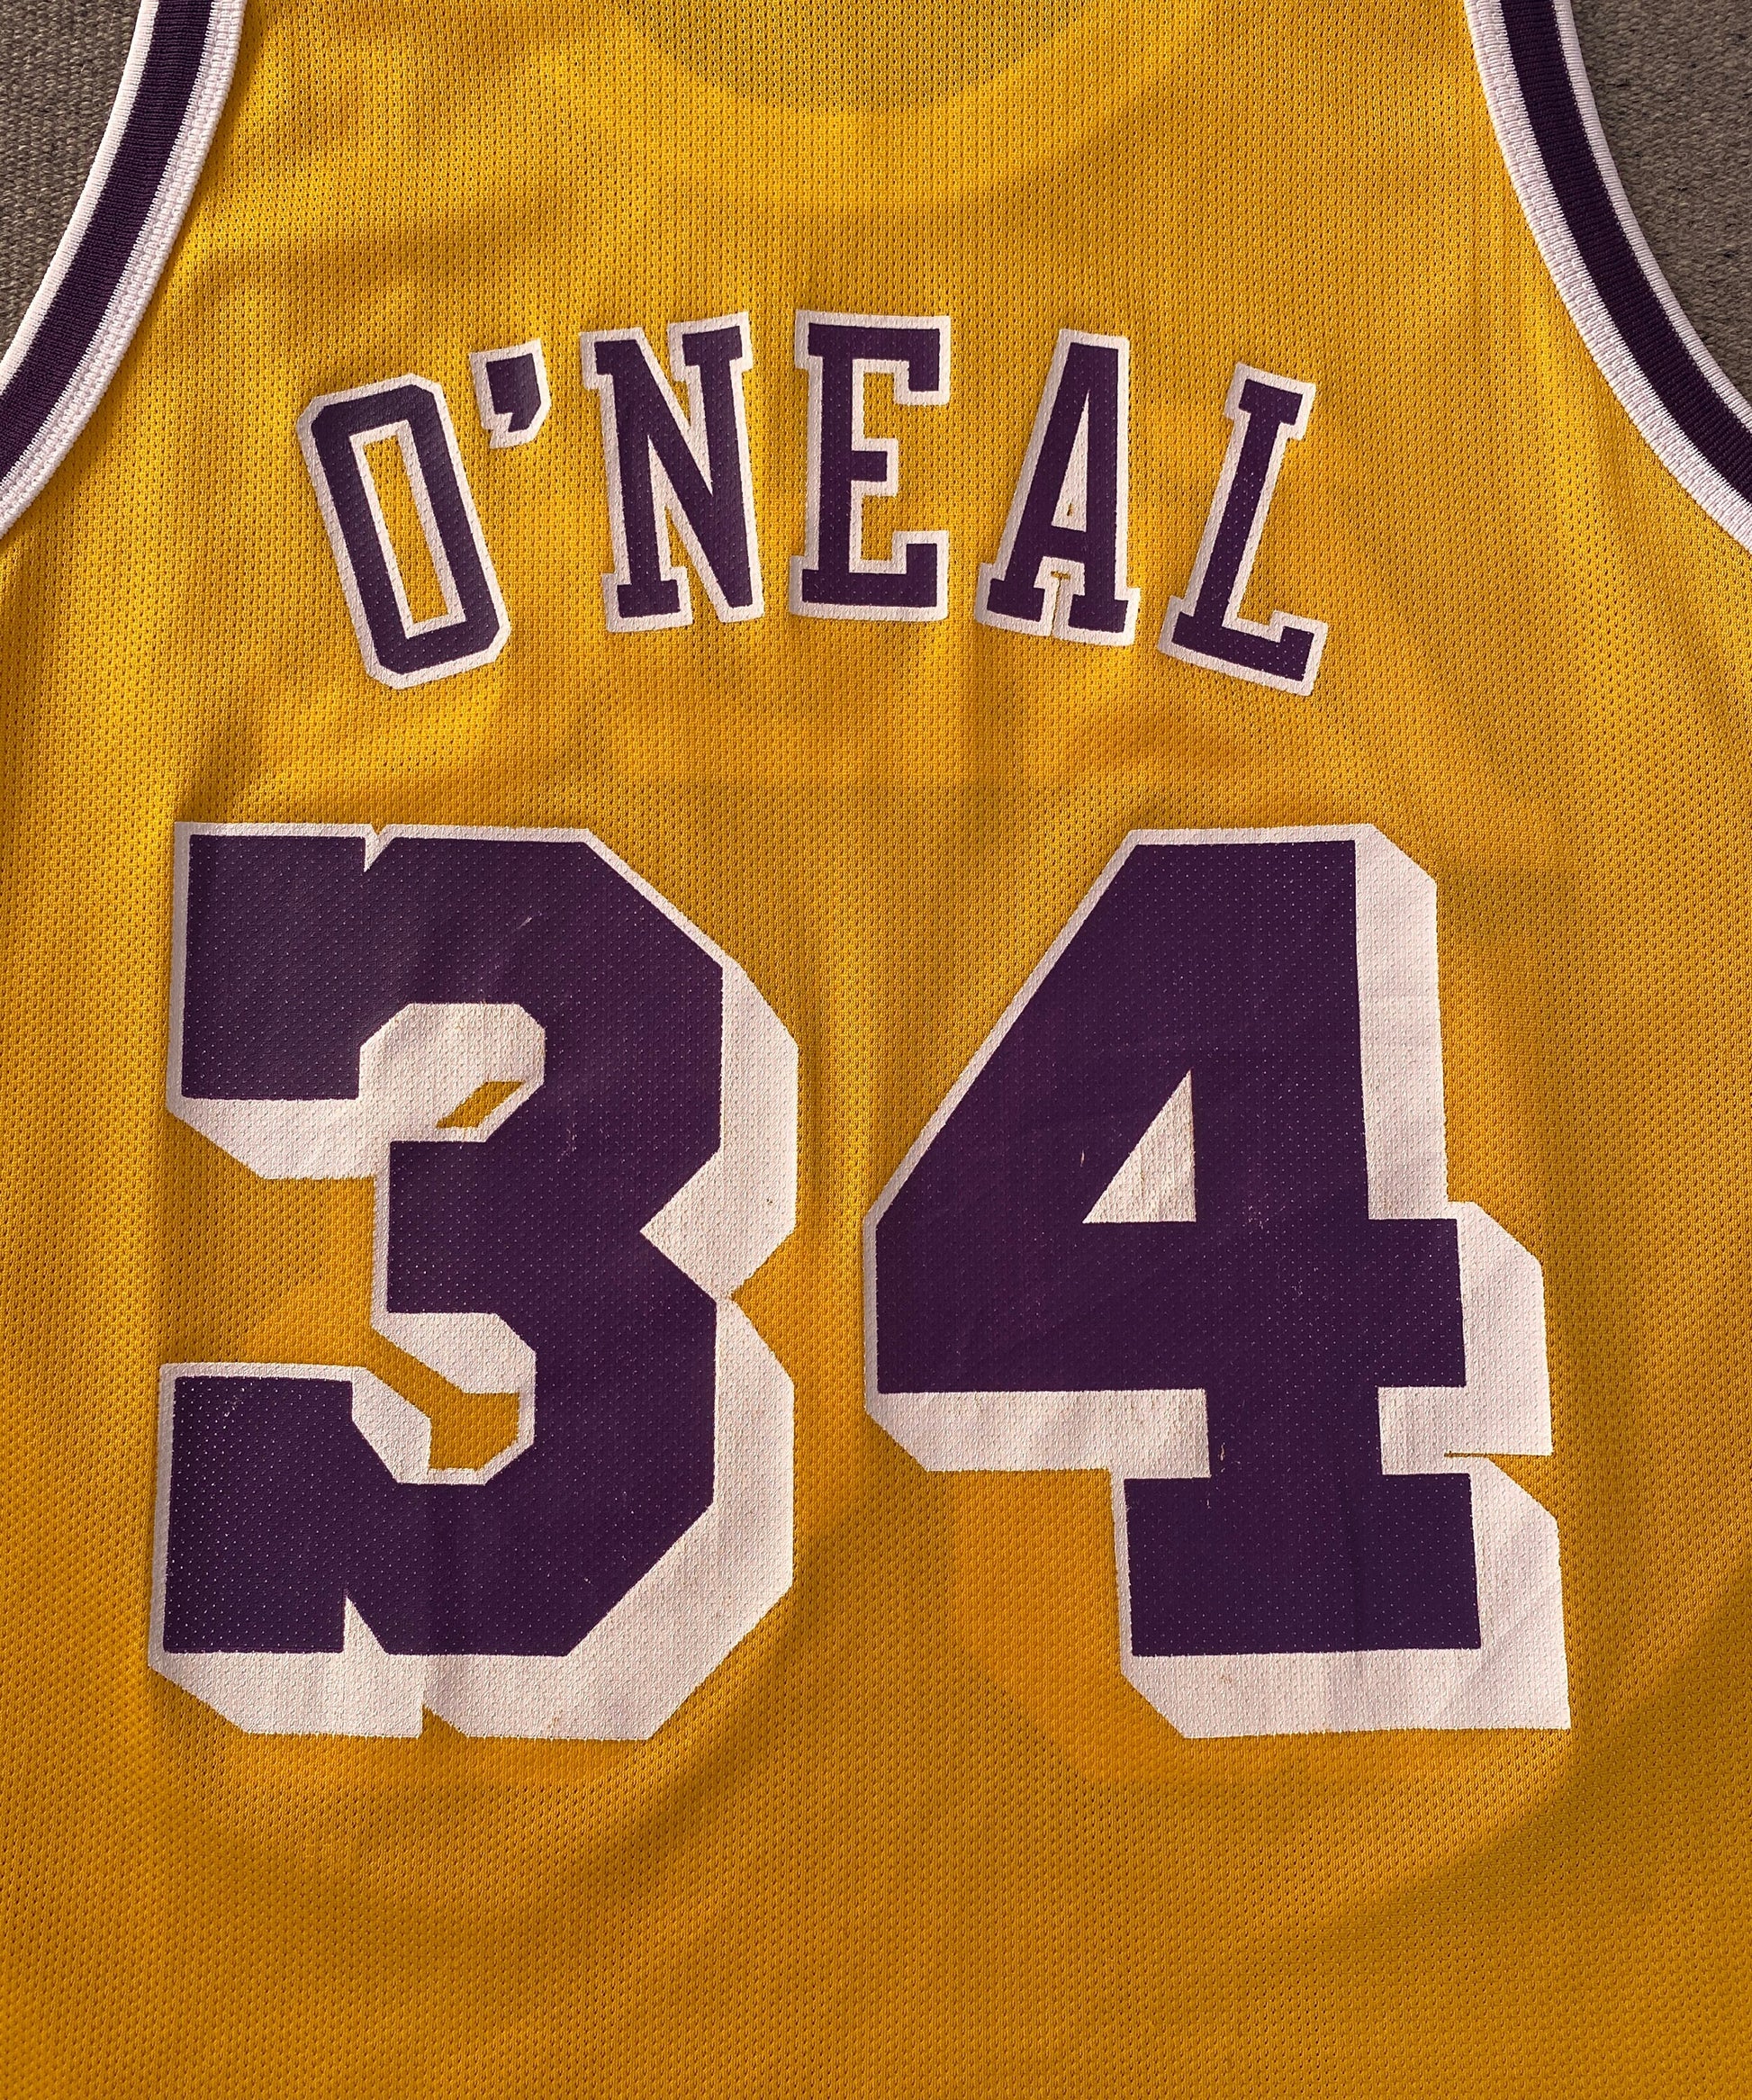 Vintage NBA Champion jersey LA Lakers with player O'Neal #34, size 44 - back view.